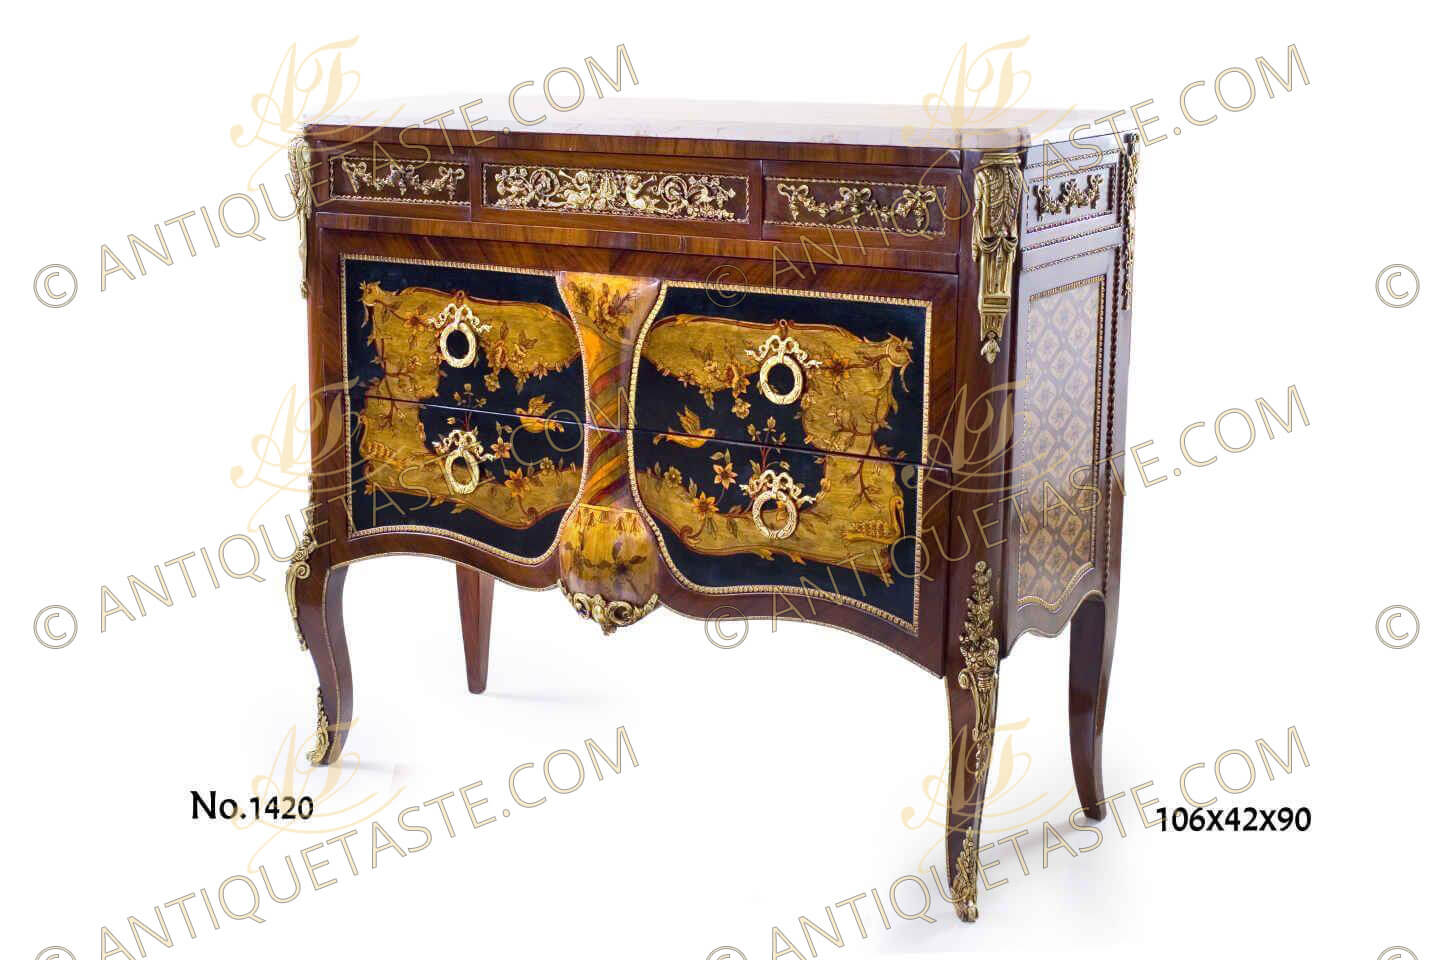 A sensational French Louis XV ormolu-mounted parquetry inlaid Chinoiserie style commode, The eared marble topped above a conforming frieze with central drawers ornamented with intricate and pierced ormolu mount with two cherubs blowing trumpet amidst foliate and scrolled movements, flanked by two faux drawers decorated with ribbon tied festoons, all within a twisted ormolu borders, Below are two large deep drawers with sans traverse Chinoiserie style scene of lake, swans, flying birds and gardens, with ribbon tied ring handles and dentil ormolu border, separated by a central inflated part with foliage marquetry pattern terminating with pierced ormolu cabuchon with foliate scrolled mount, The cut corners display on top a fine and richly chiseled ormolu mounts of acanthus volute on drapes hung on fluted façade above a pine cone, the lower part adorned with a magnificent large ormolu mount of blossoming flower bouquet on volute chutes rest on the cabriole leg hip, The sides with a repeated upper ormolu design as the forepart above a diamond parquetry pattern with flower rosettes, The lower contour of the commode with a beaded ormolu band runs on the cabriole legs that terminate with detailed foliate ormolu cast turned sabots